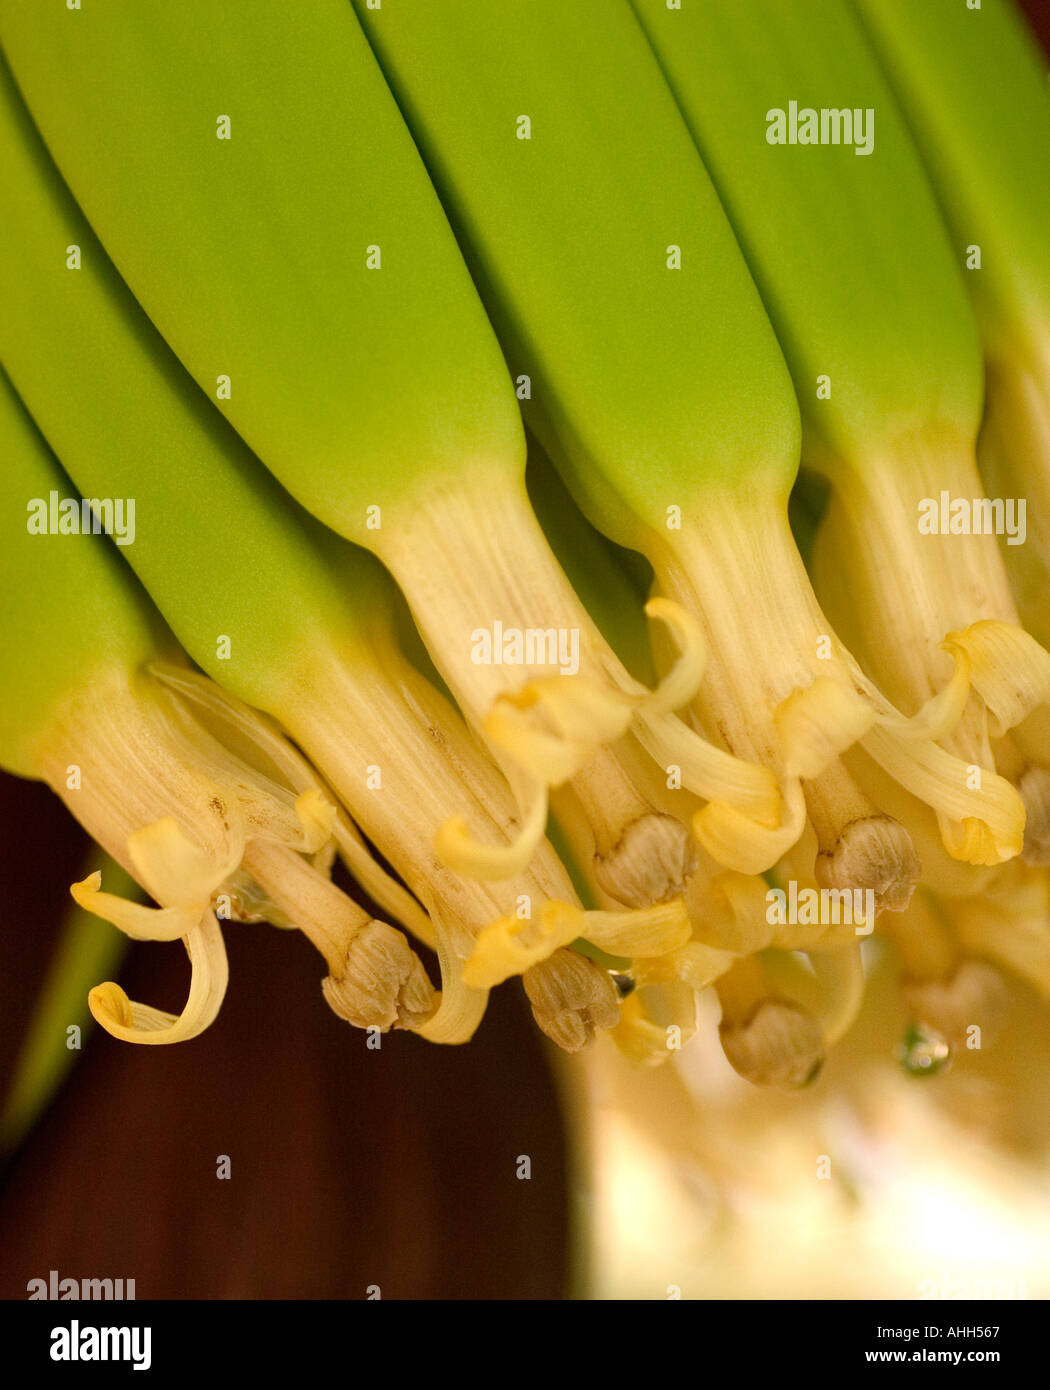 Young green, bananas forming on plant Stock Photo